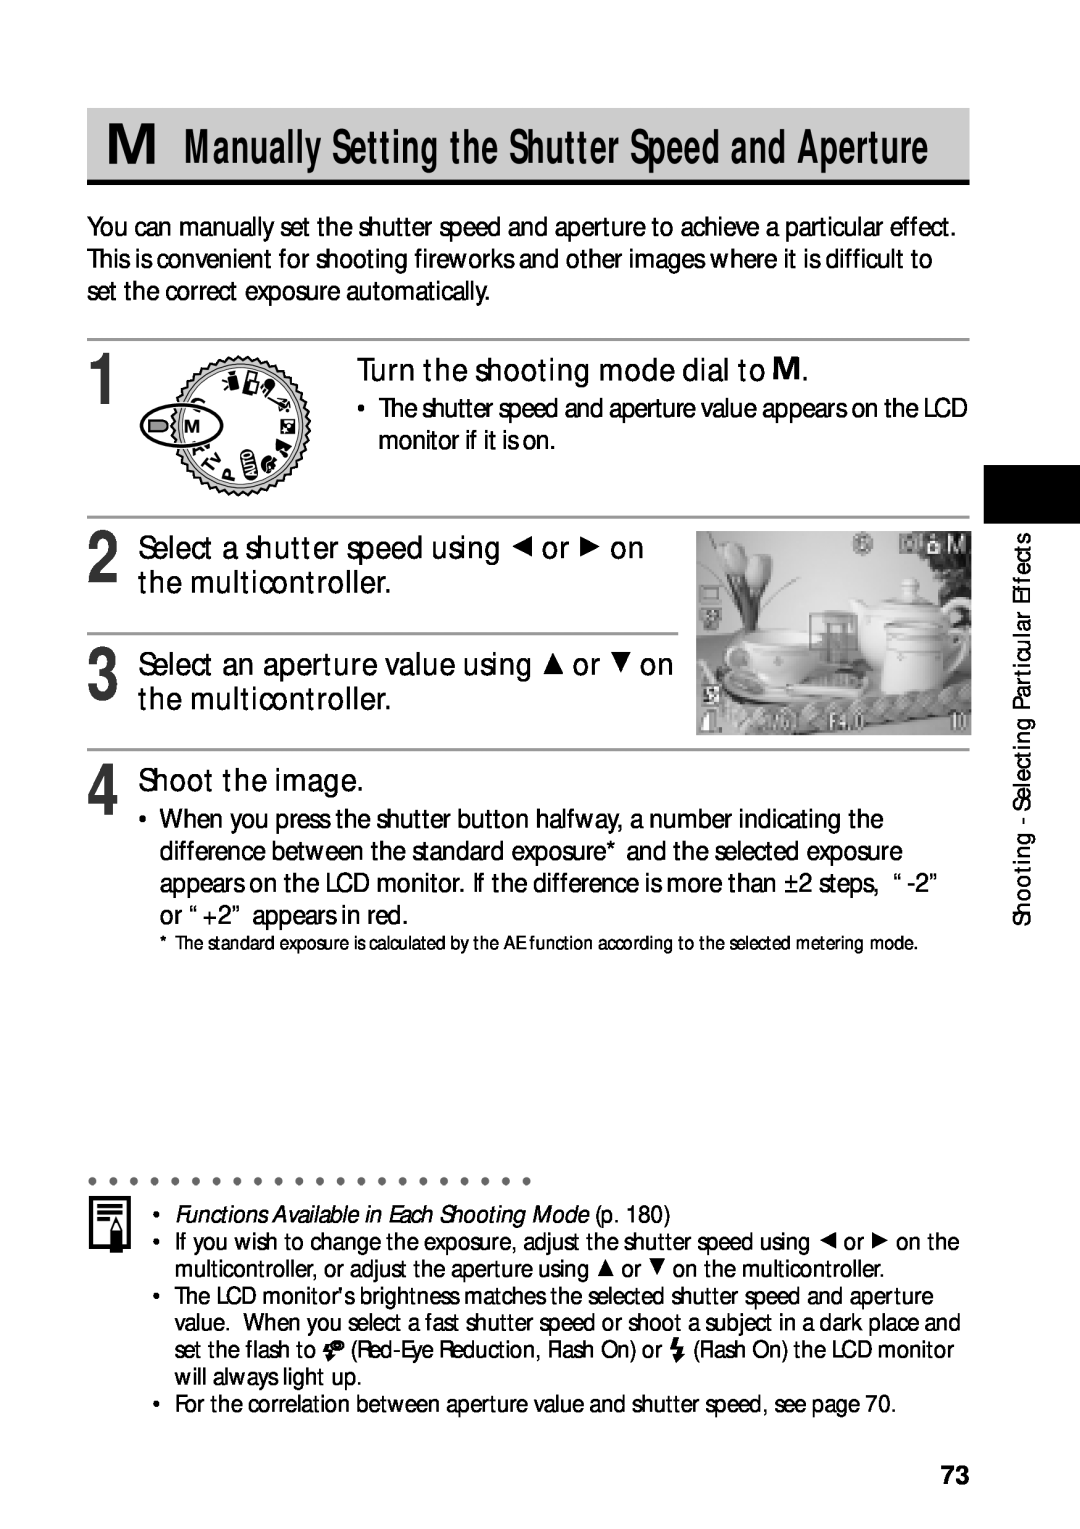 Canon PowerShot S45 manual Select a shutter speed using B or A on the multicontroller, Shoot the image 